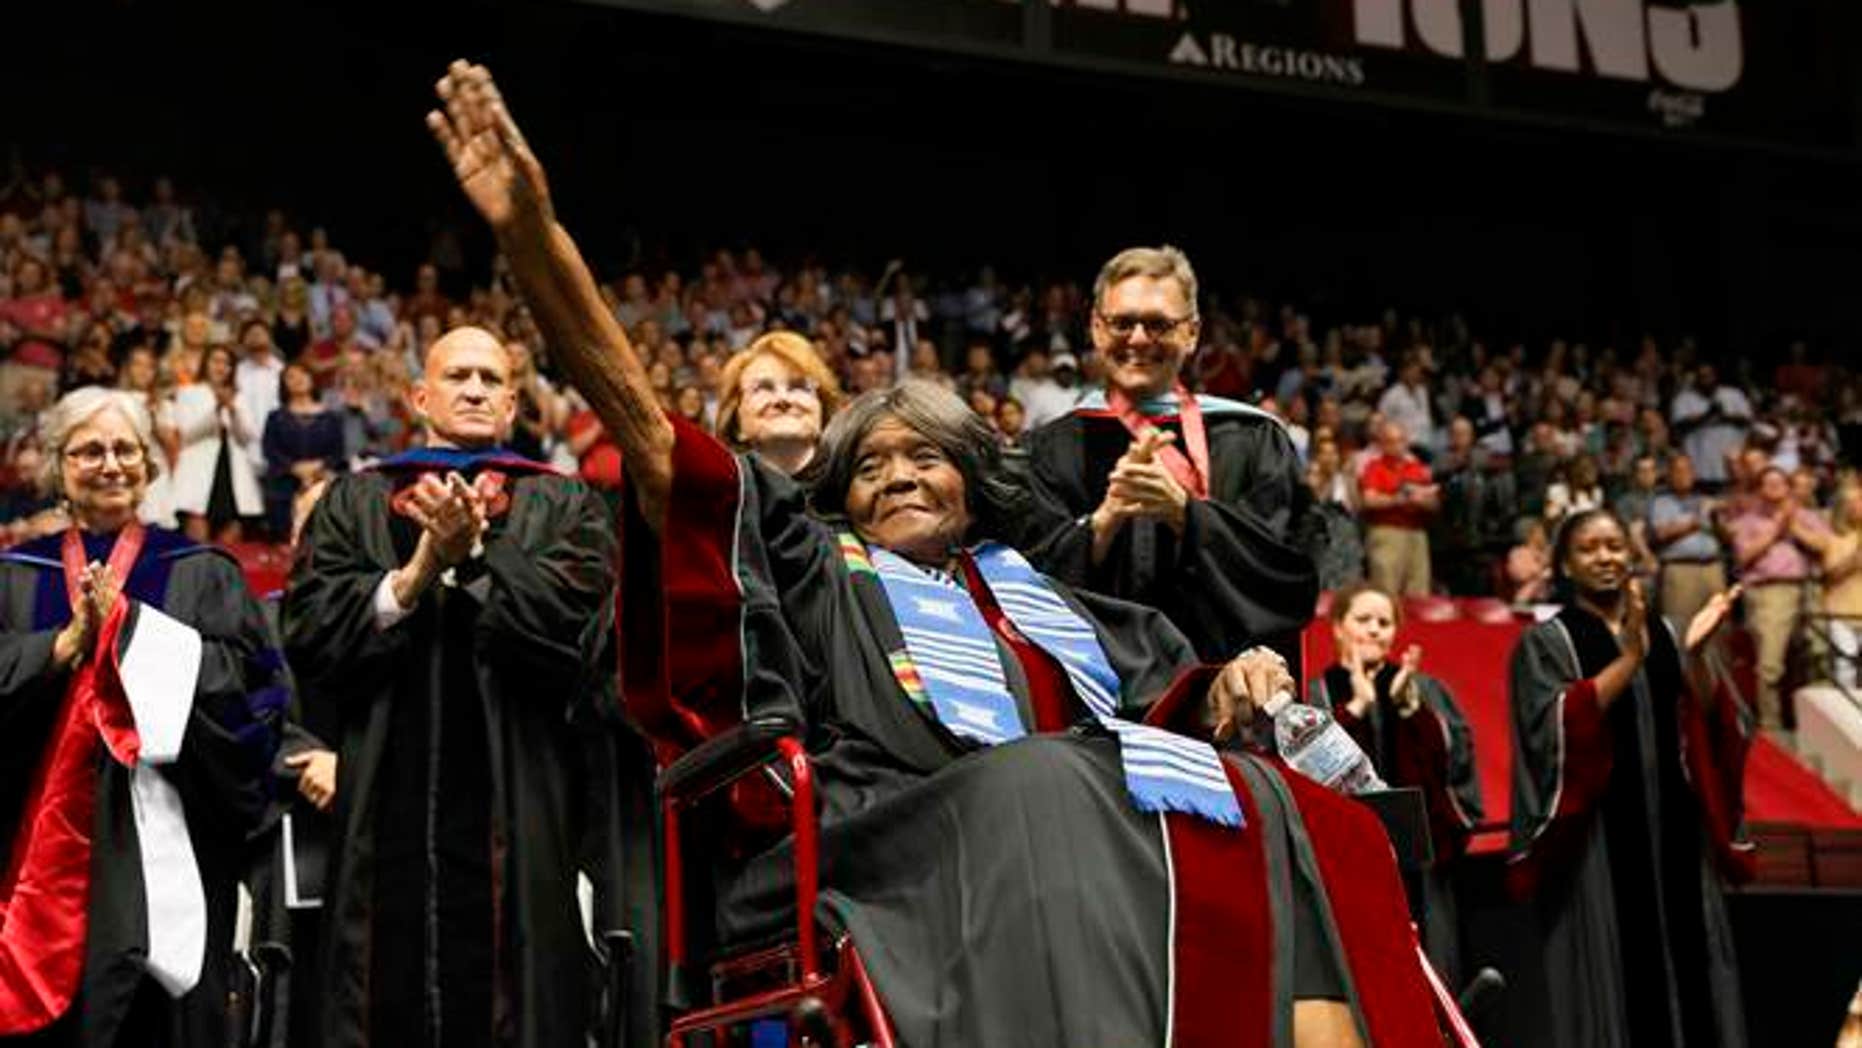 This photo provided by UA Strategic Communications, Ms. Lucy Foster, thanks the crowd for receiving an honorary doctorate at a launch exercise at the University of Alabama on Friday, May 3, 2019 in Tuscaloosa, Alabama . The university awarded the honorary doctorate in Foster, the first African-American to attend university. (Zach Riggins / AU Strategic Communications via AP)